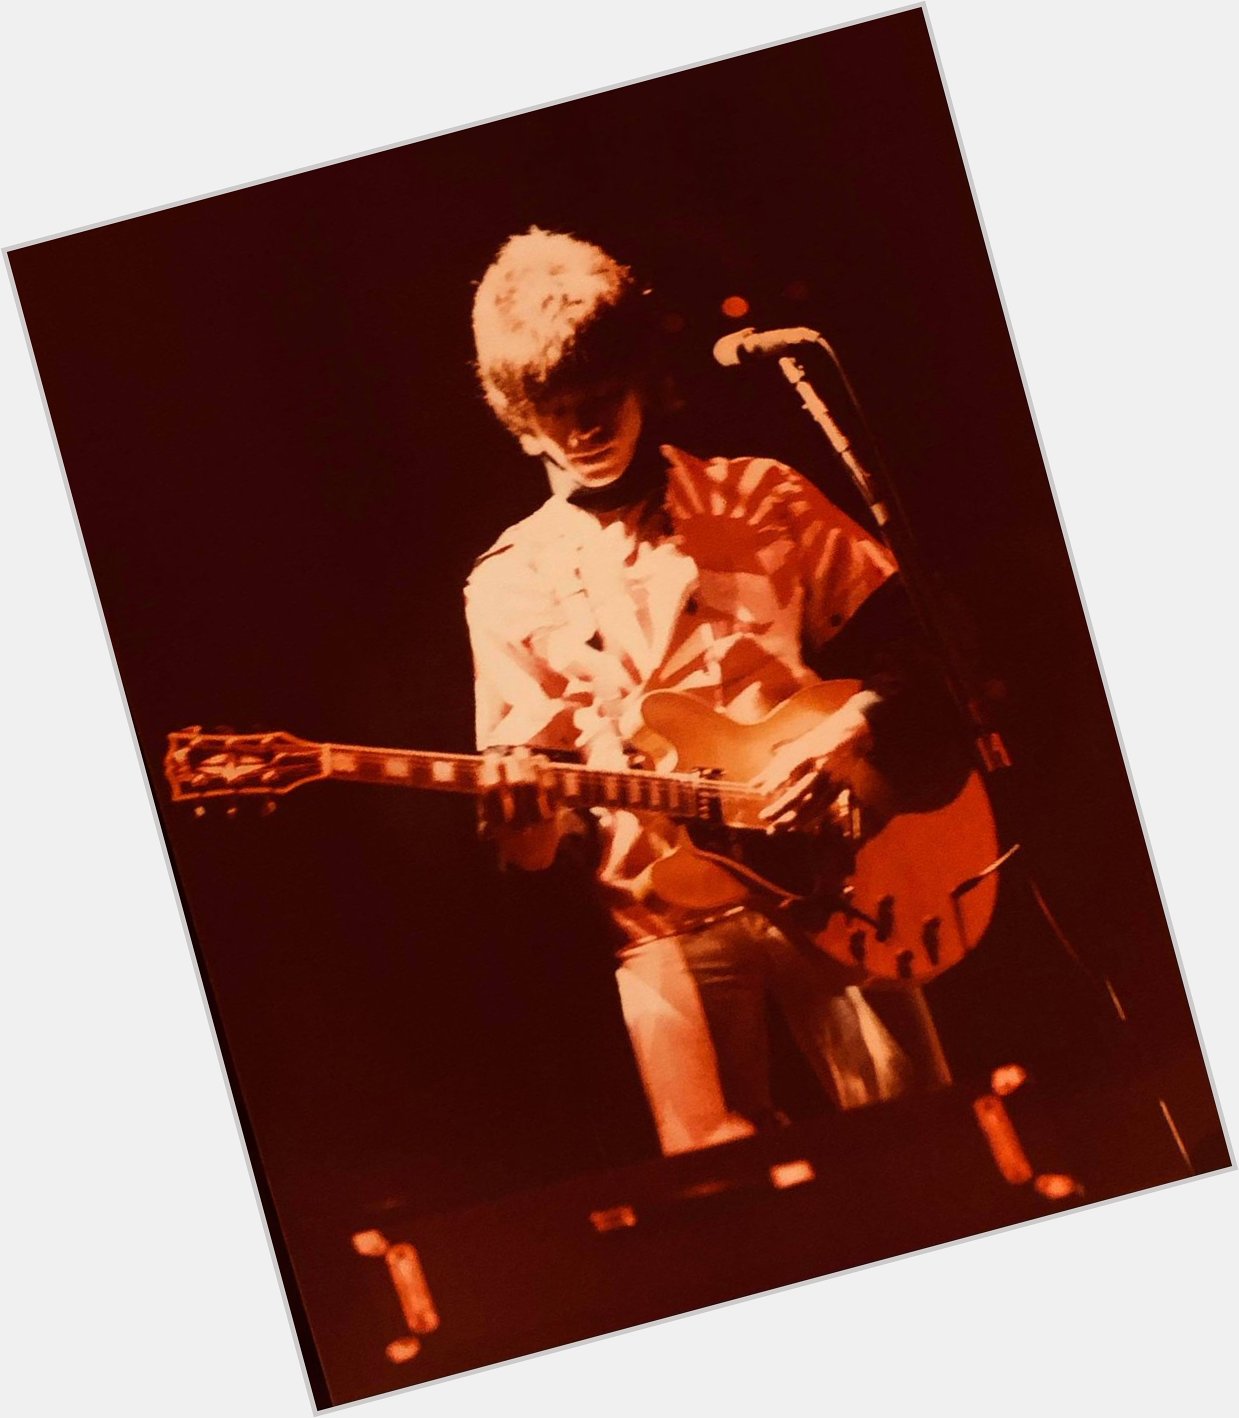 Happy 67th birthday to one of the most innovative and influential guitarists of all time, elliot easton of the cars! 